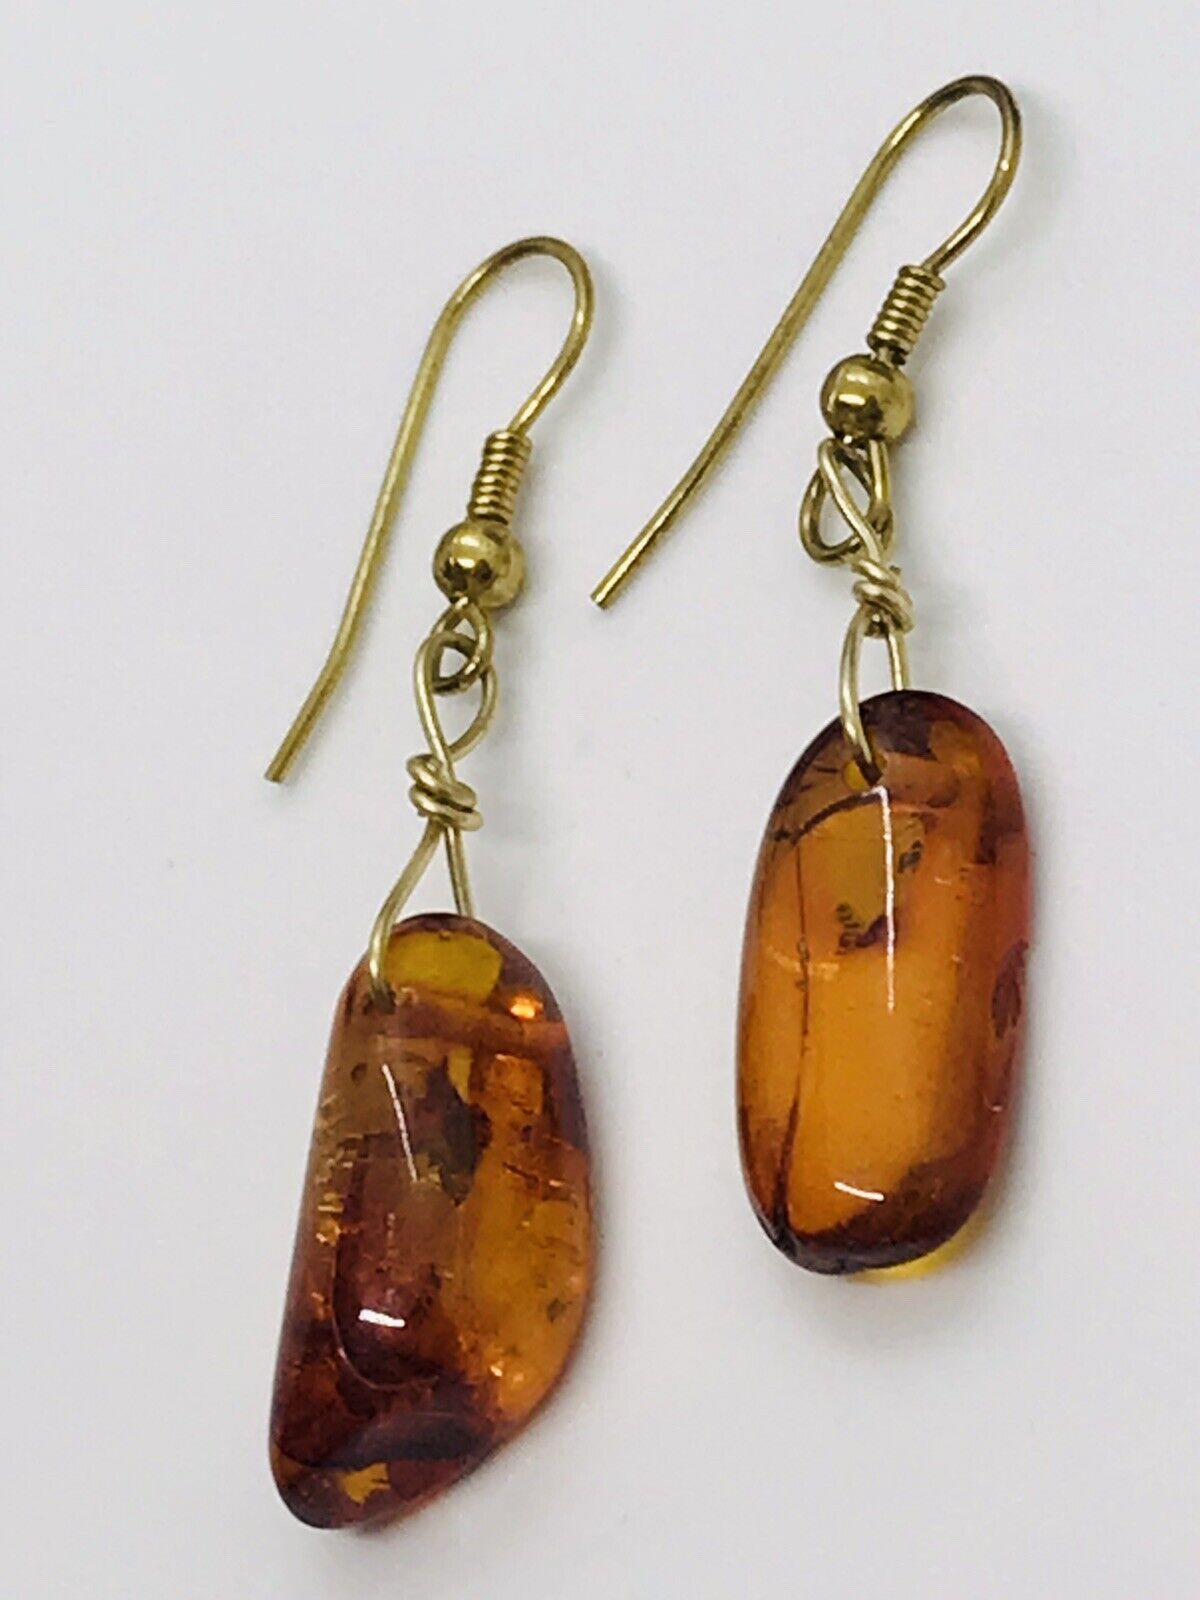 Baltic Amber Dangle Drop Earrings Gold Tone Wires - image 1